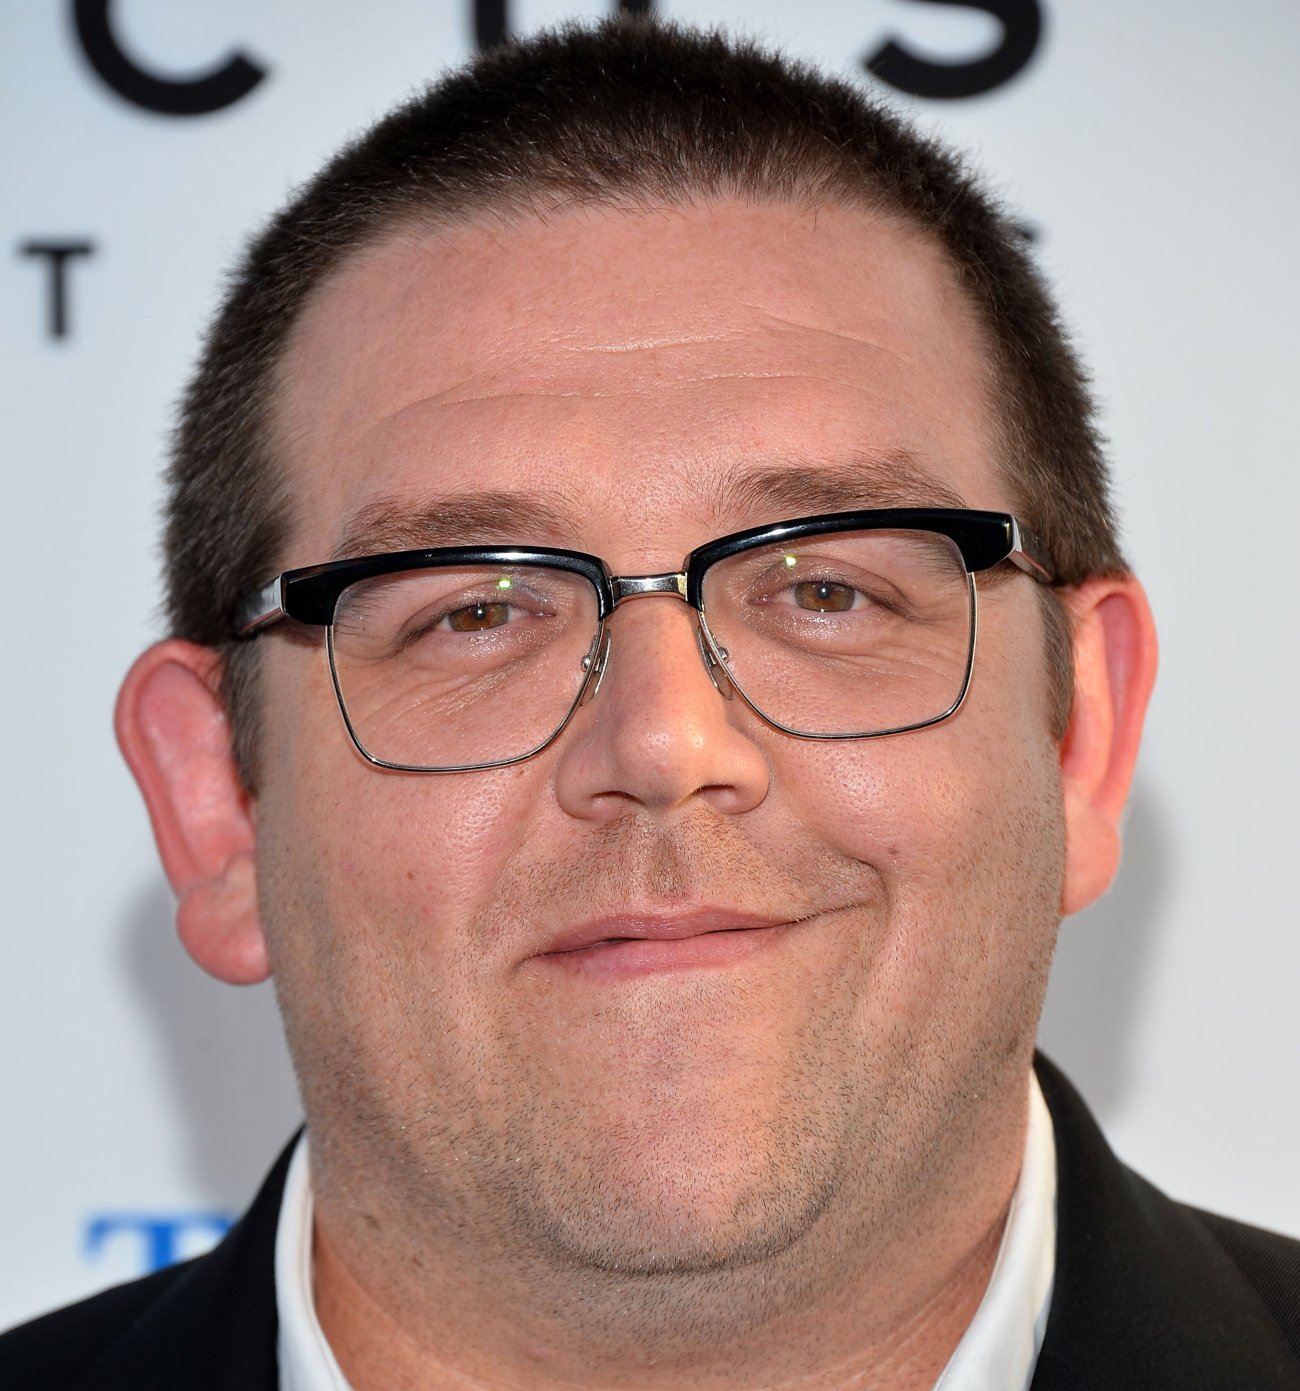 Nick Frost arrives at the Los Angeles premiere of ‘The World's End’ on August 21, 2013